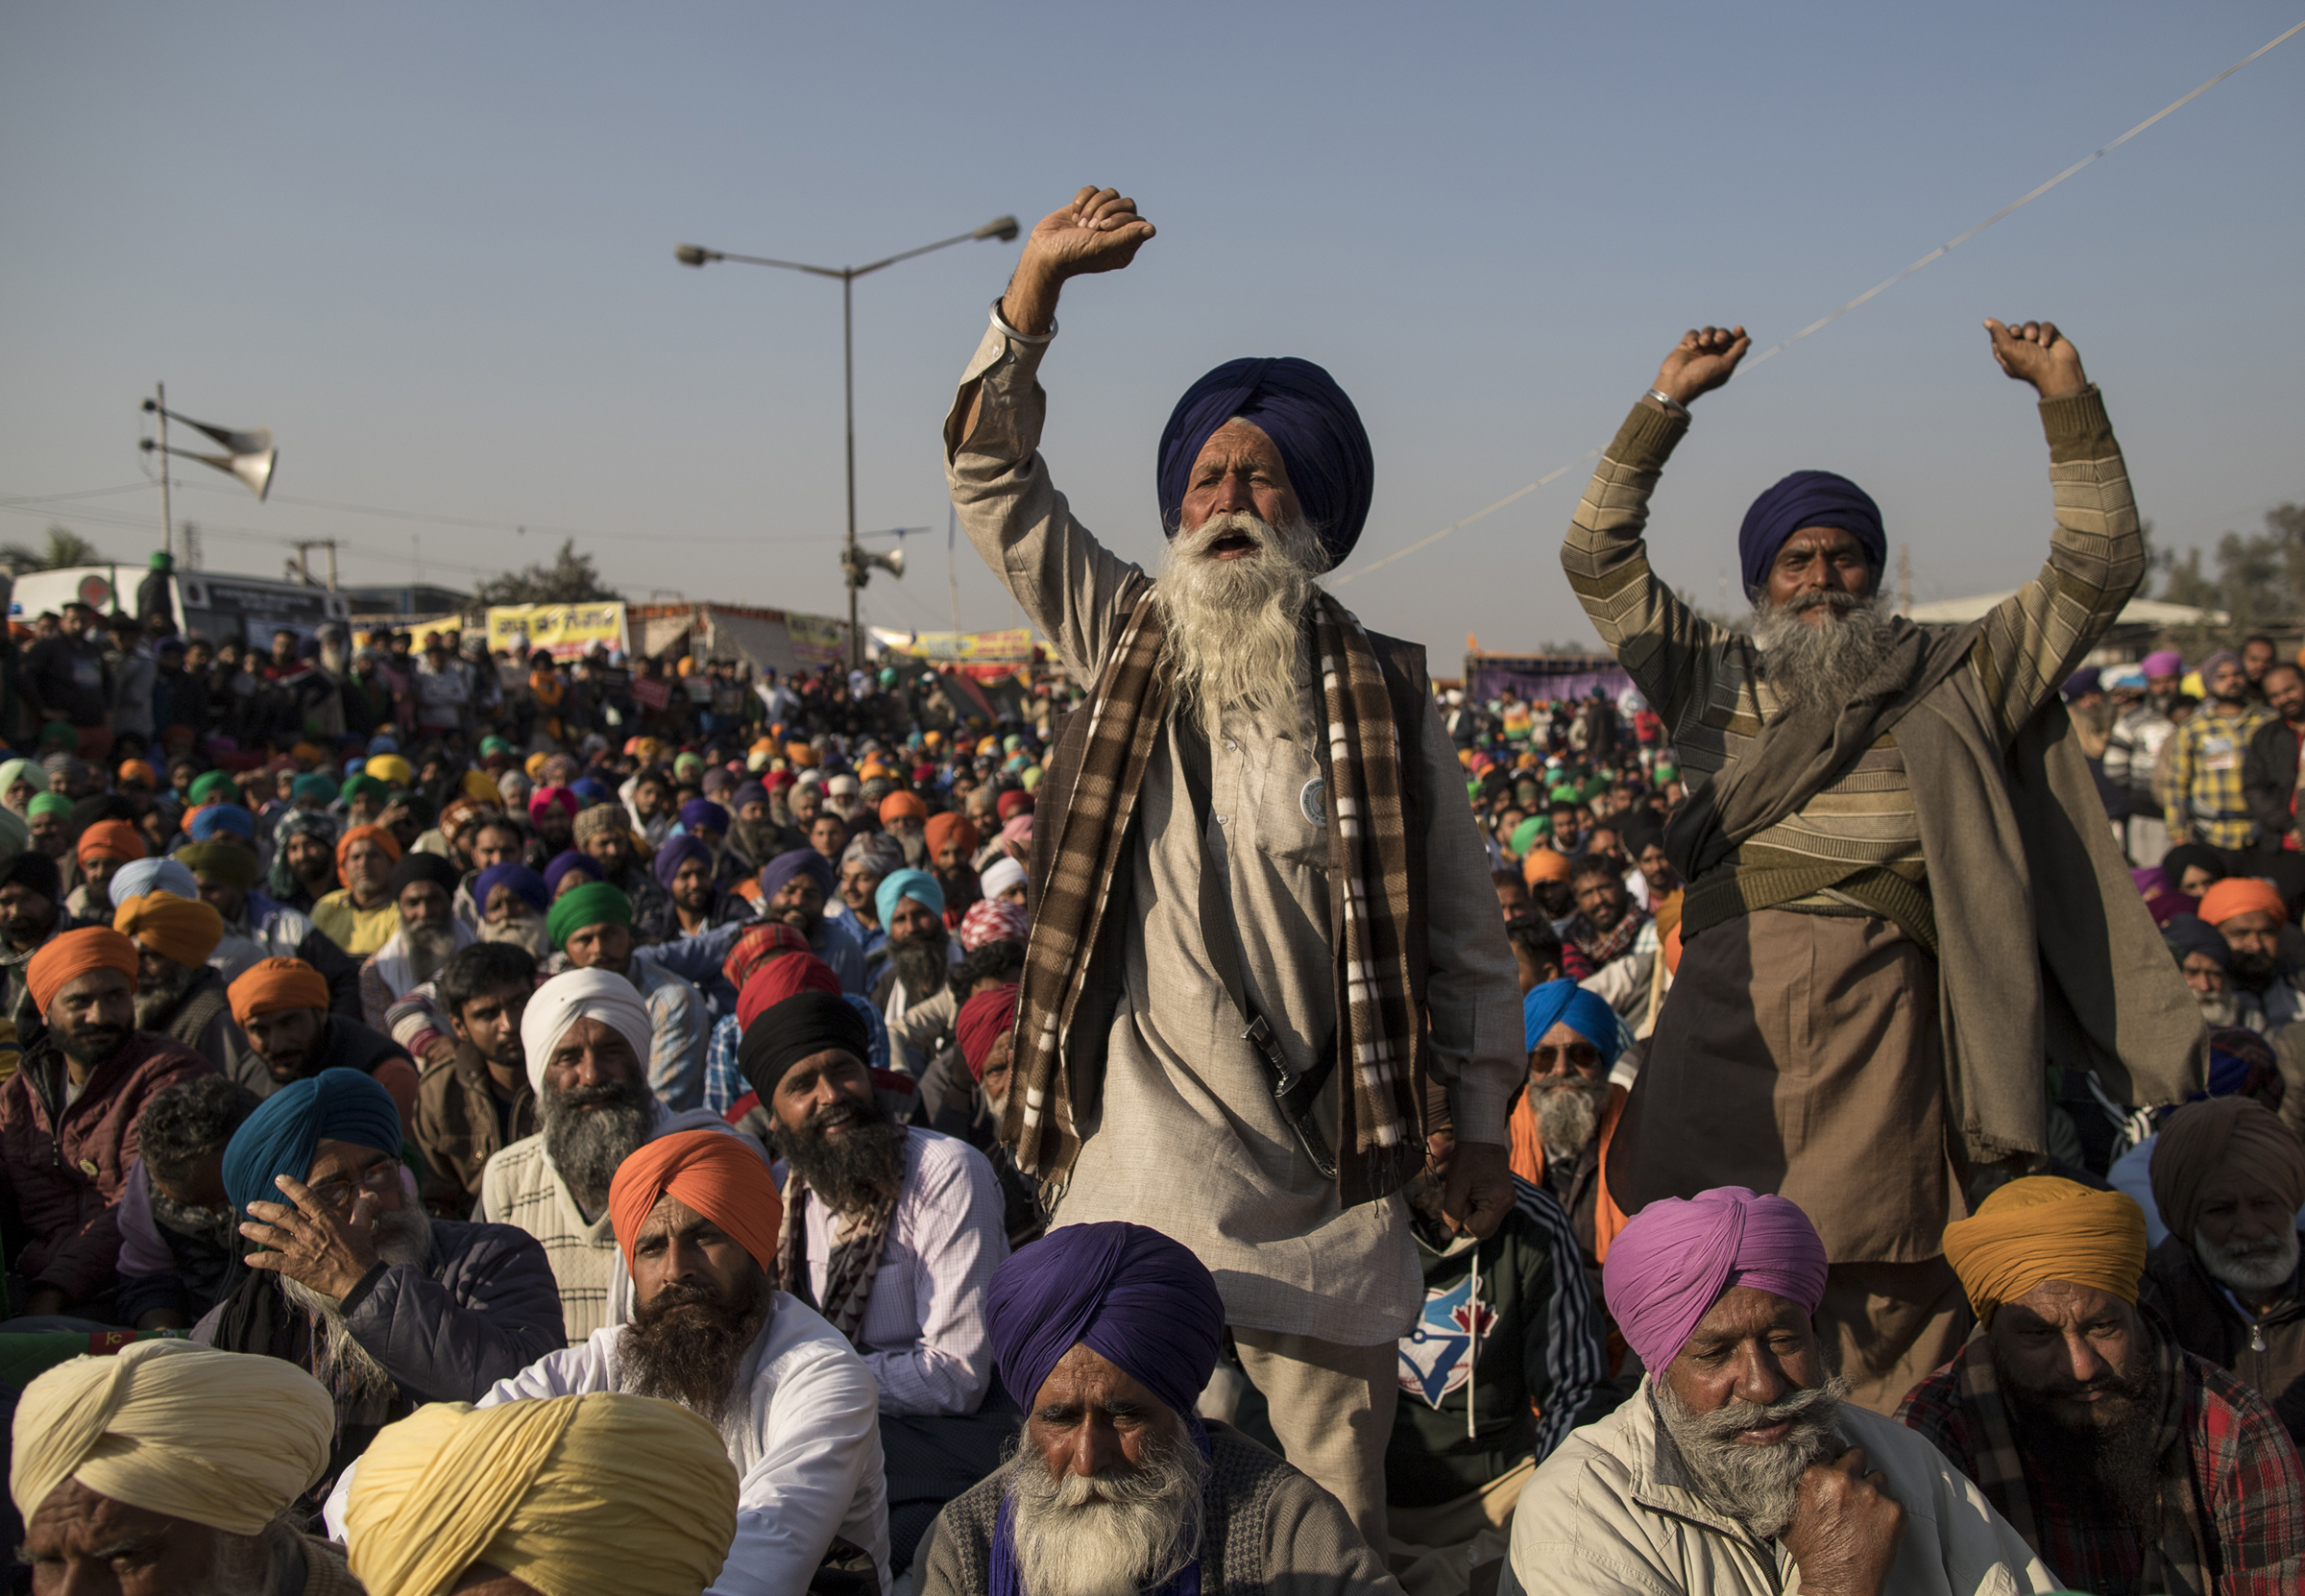 Farmers shout slogans as they participate in a protest at the Delhi Singhu border in Delhi, India on Dec. 18, 2020. (Anindito Mukherjee—Getty Images)